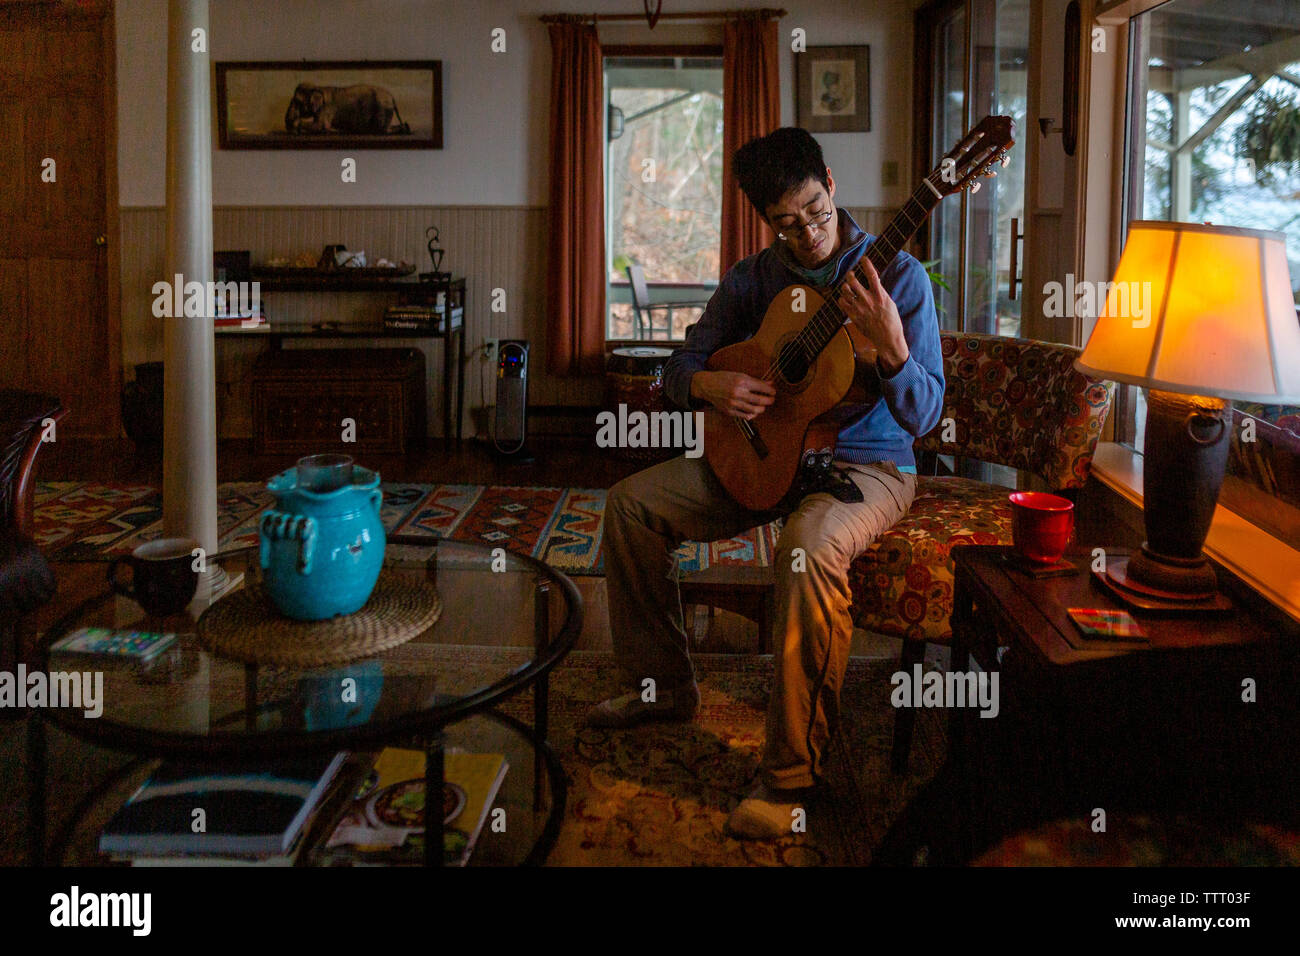 Portrait of a man playing guitar by himself in an eclectic home Stock Photo